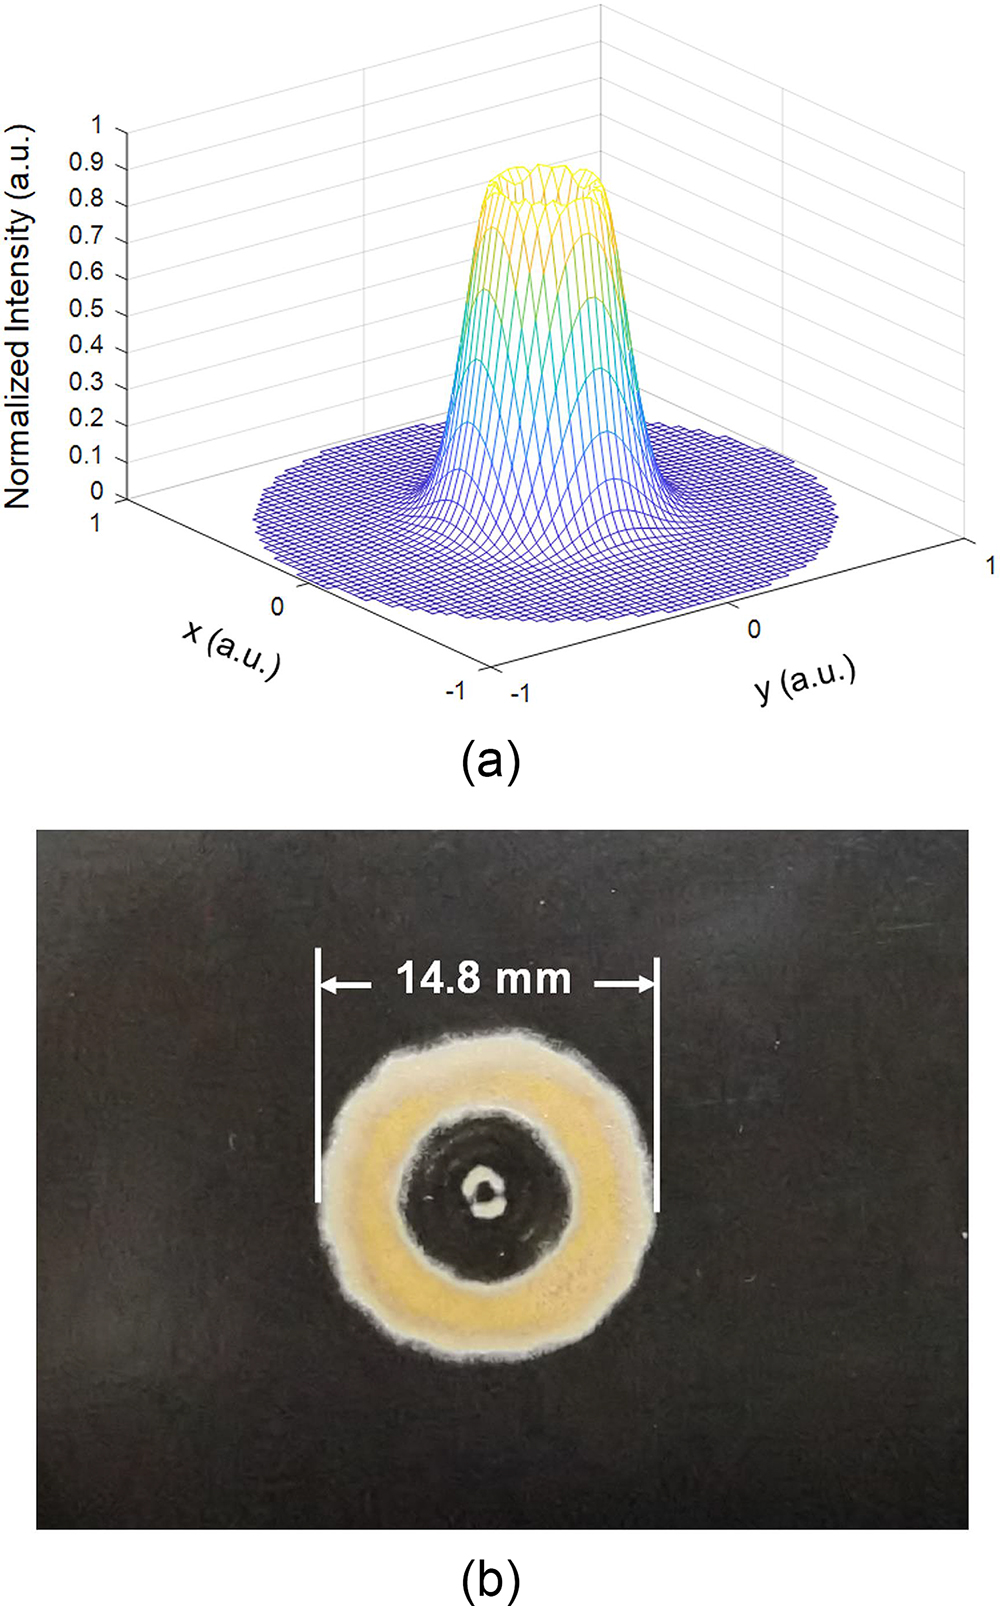 (a) Simulated far-field intensity distribution and (b) photo of the beam far-field distribution at z = 10 m of the vortex beam.